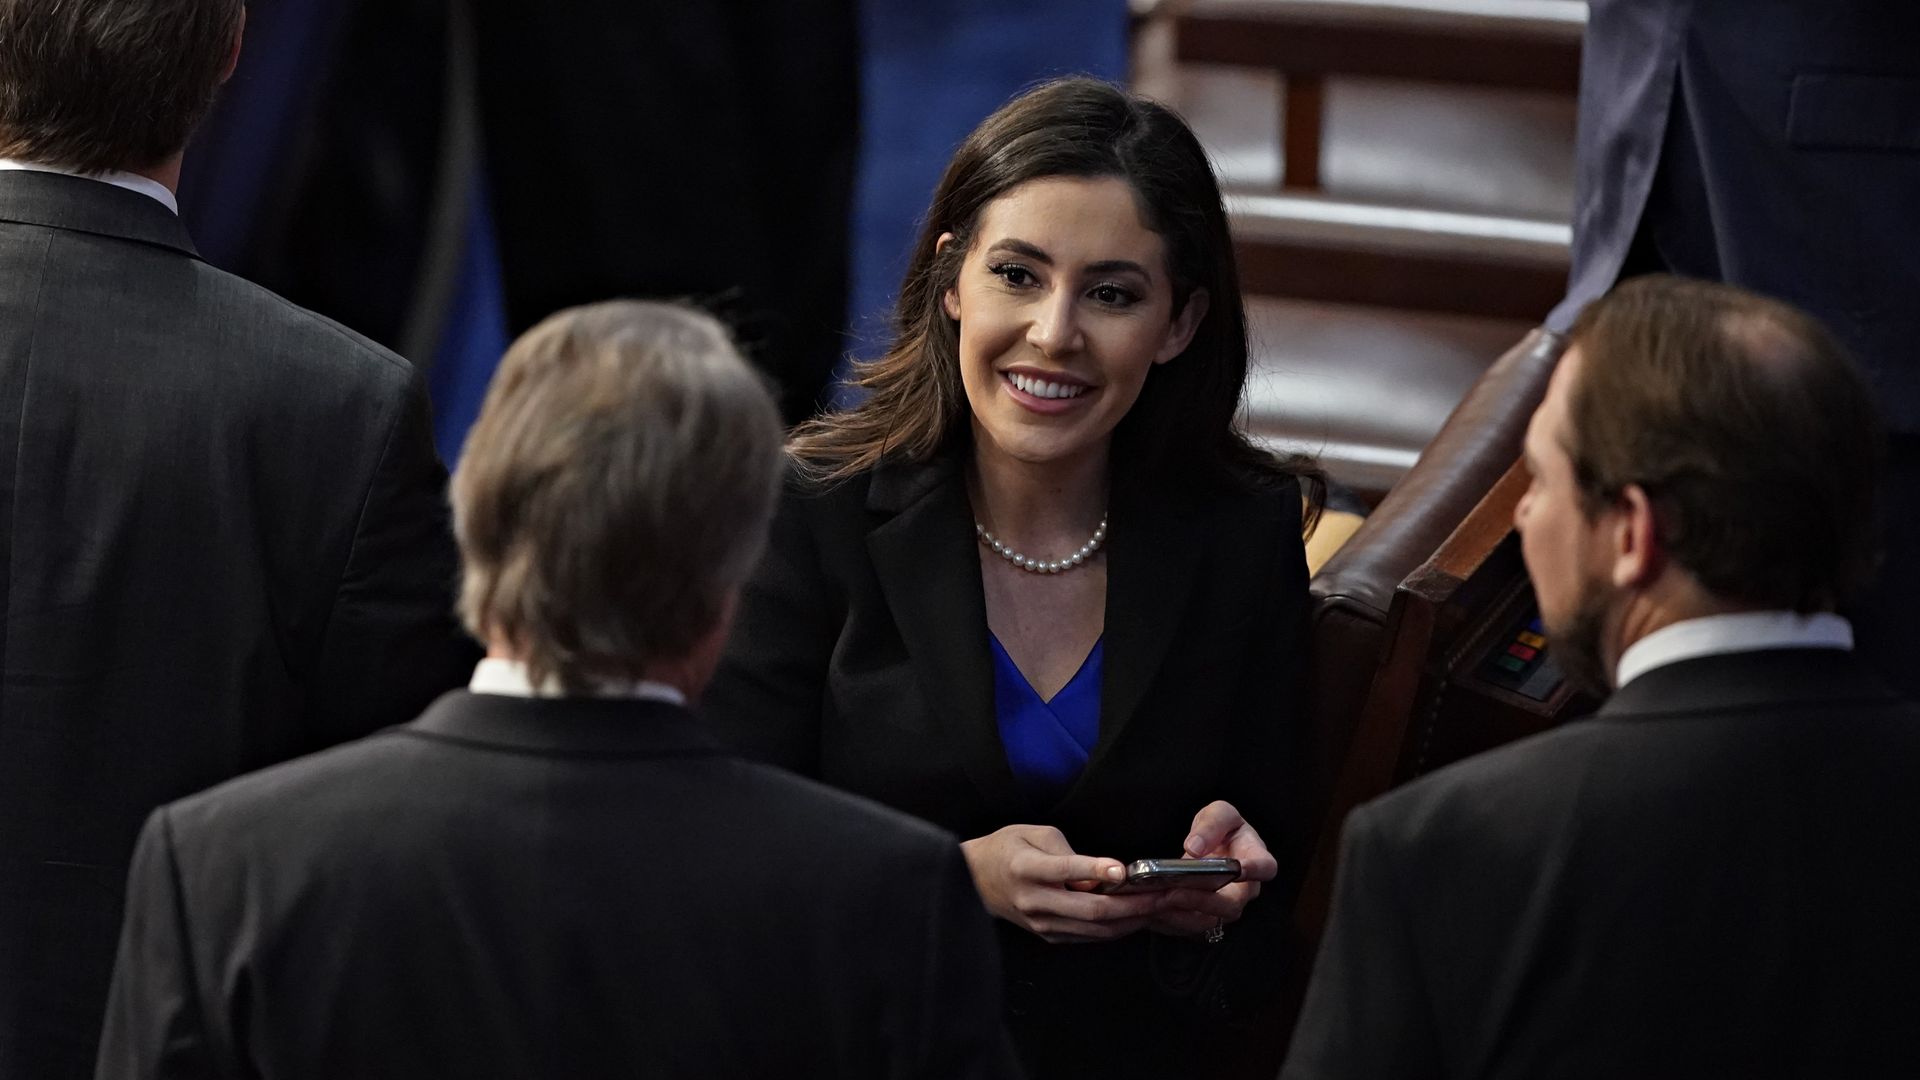 Rep. Anna Paulina Luna, wearing a blue dress, black blazer and pearl-shaped necklace, speaks to colleagues on the House floor.